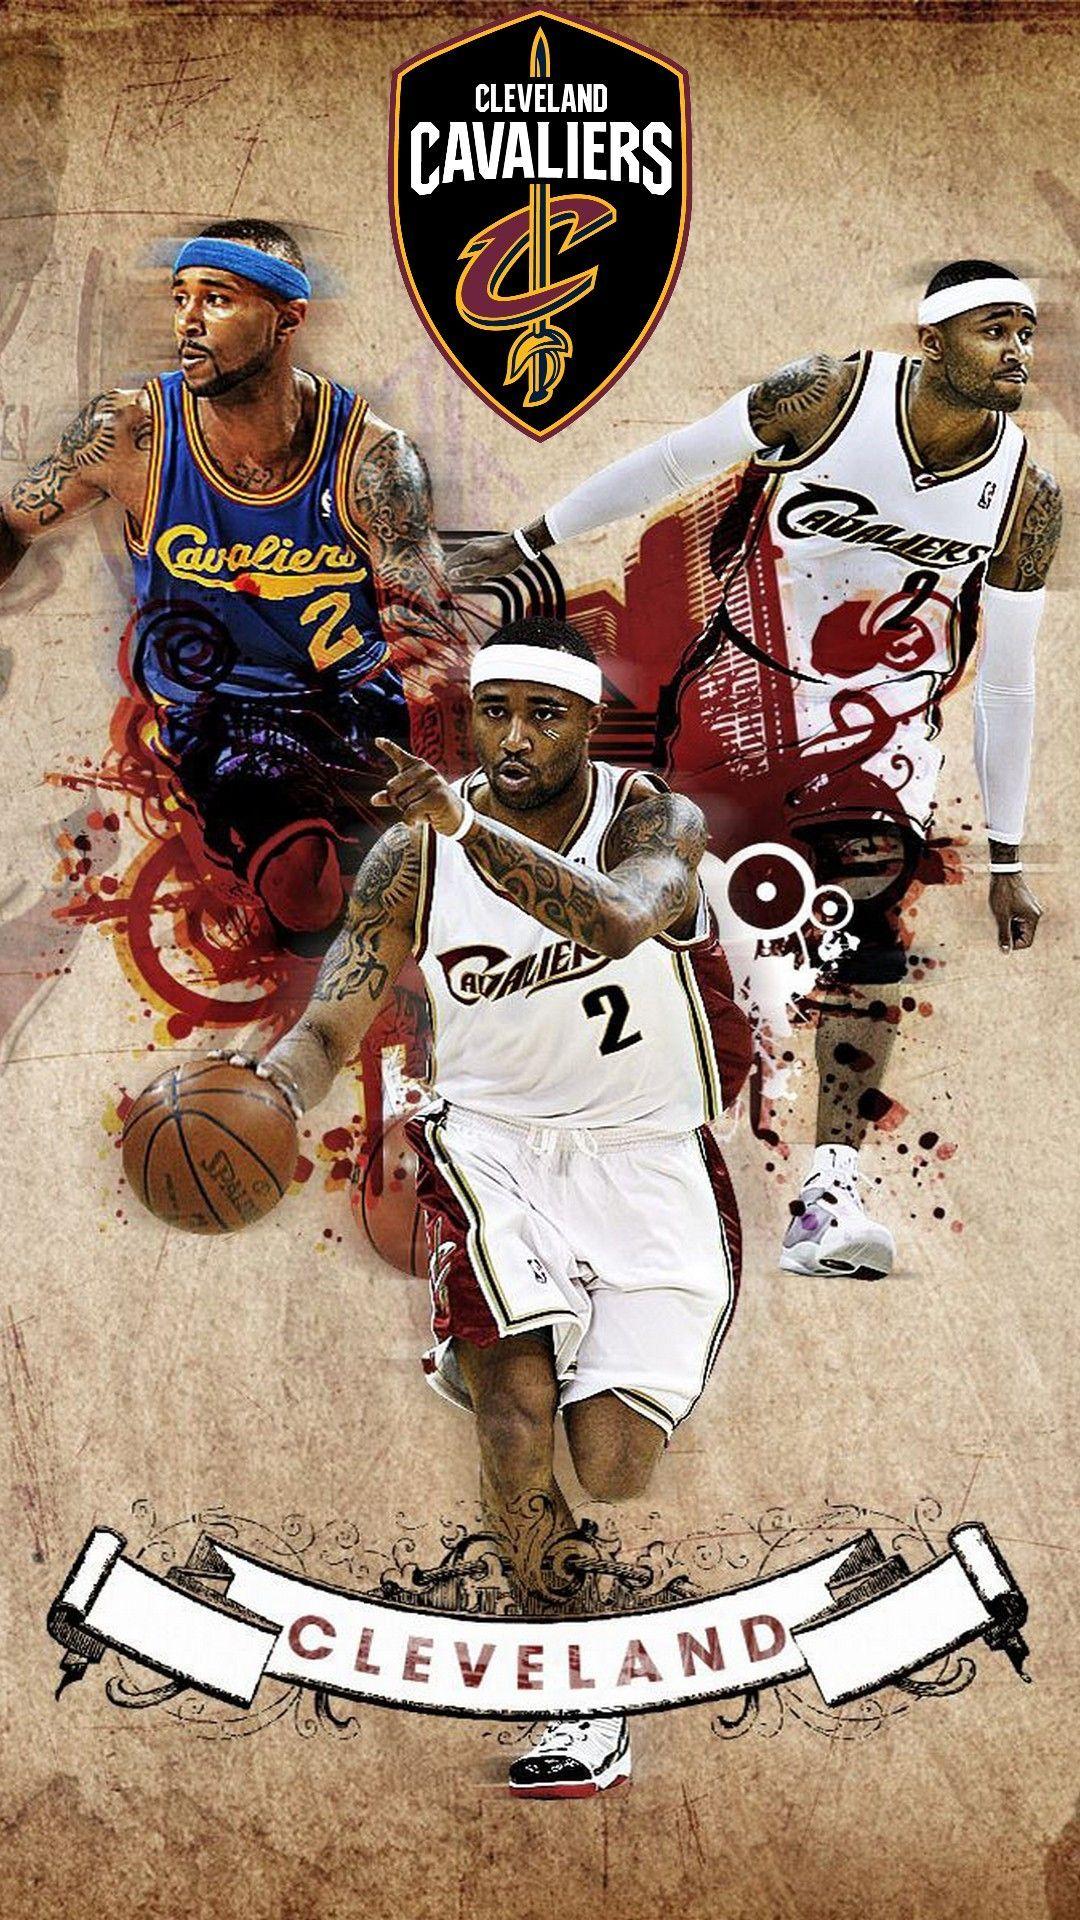 Cleveland Cavaliers NBA Wallpaper For Mobile Basketball Wallpaper. Nba wallpaper, Cavaliers nba, Basketball wallpaper